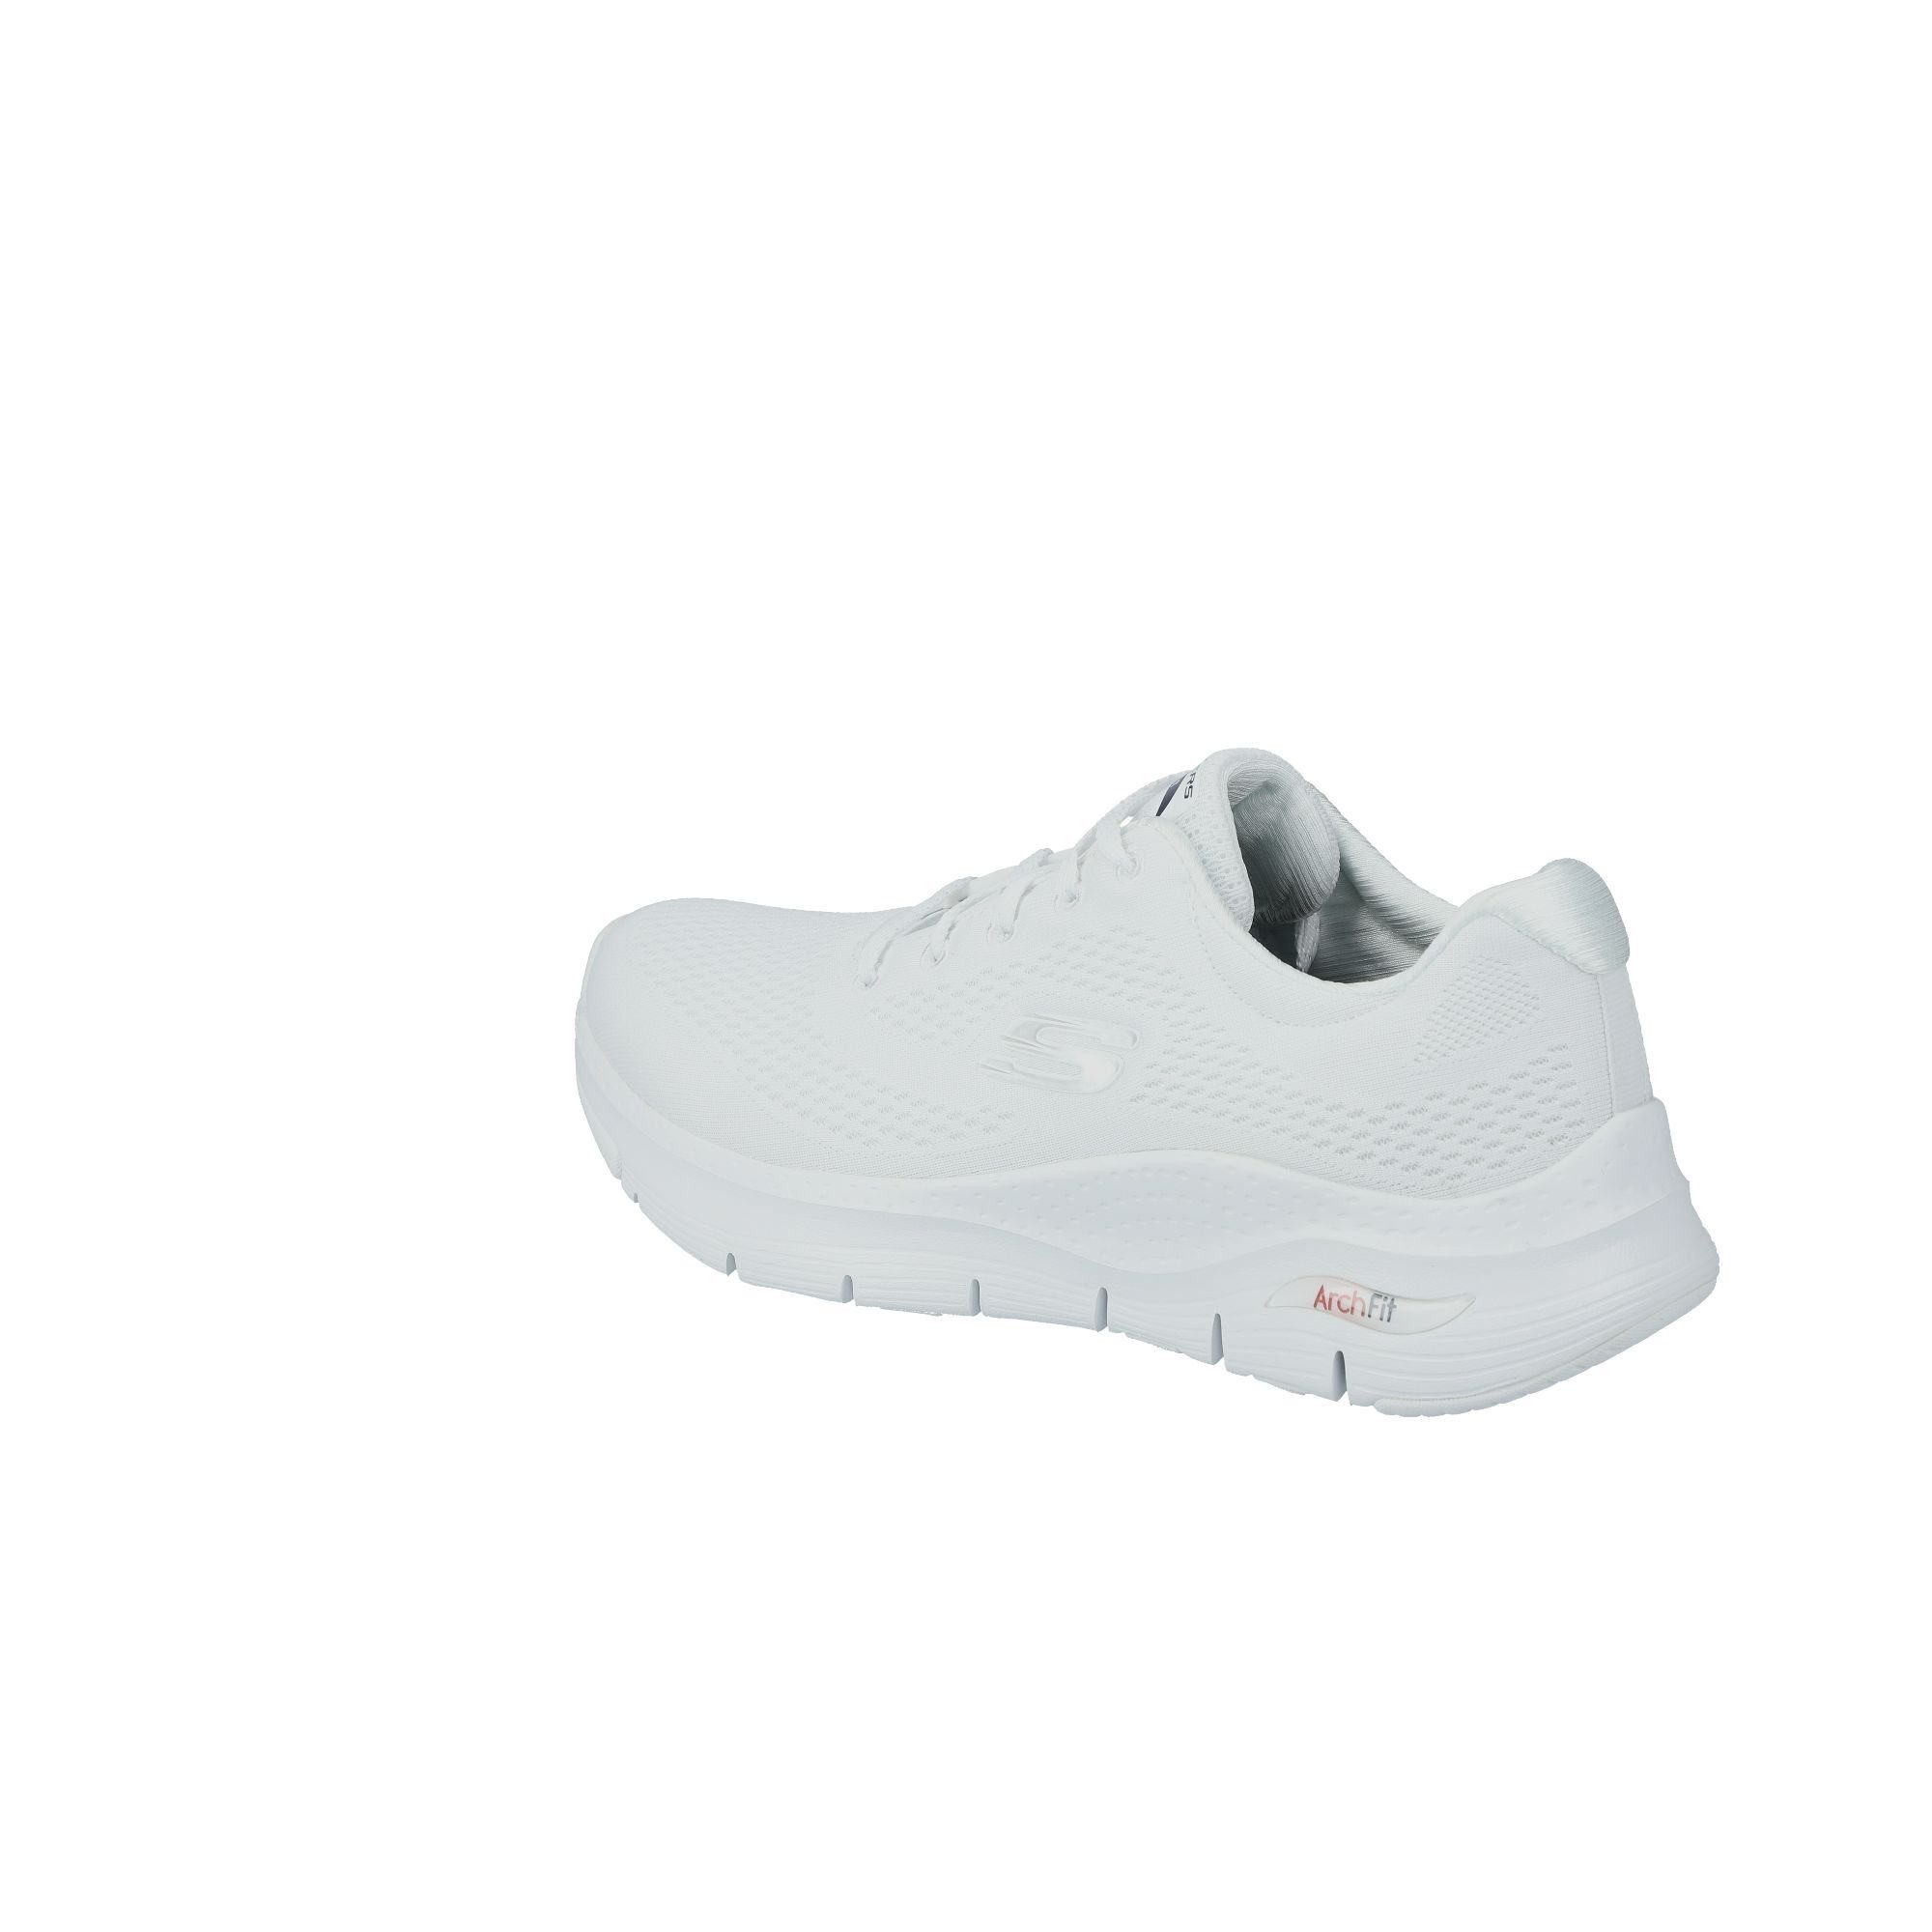 SKECHERS PERFORMANCE Skechers ARCH FIT - BIG APPEAL Sneaker (2-tlg) white/navy/red